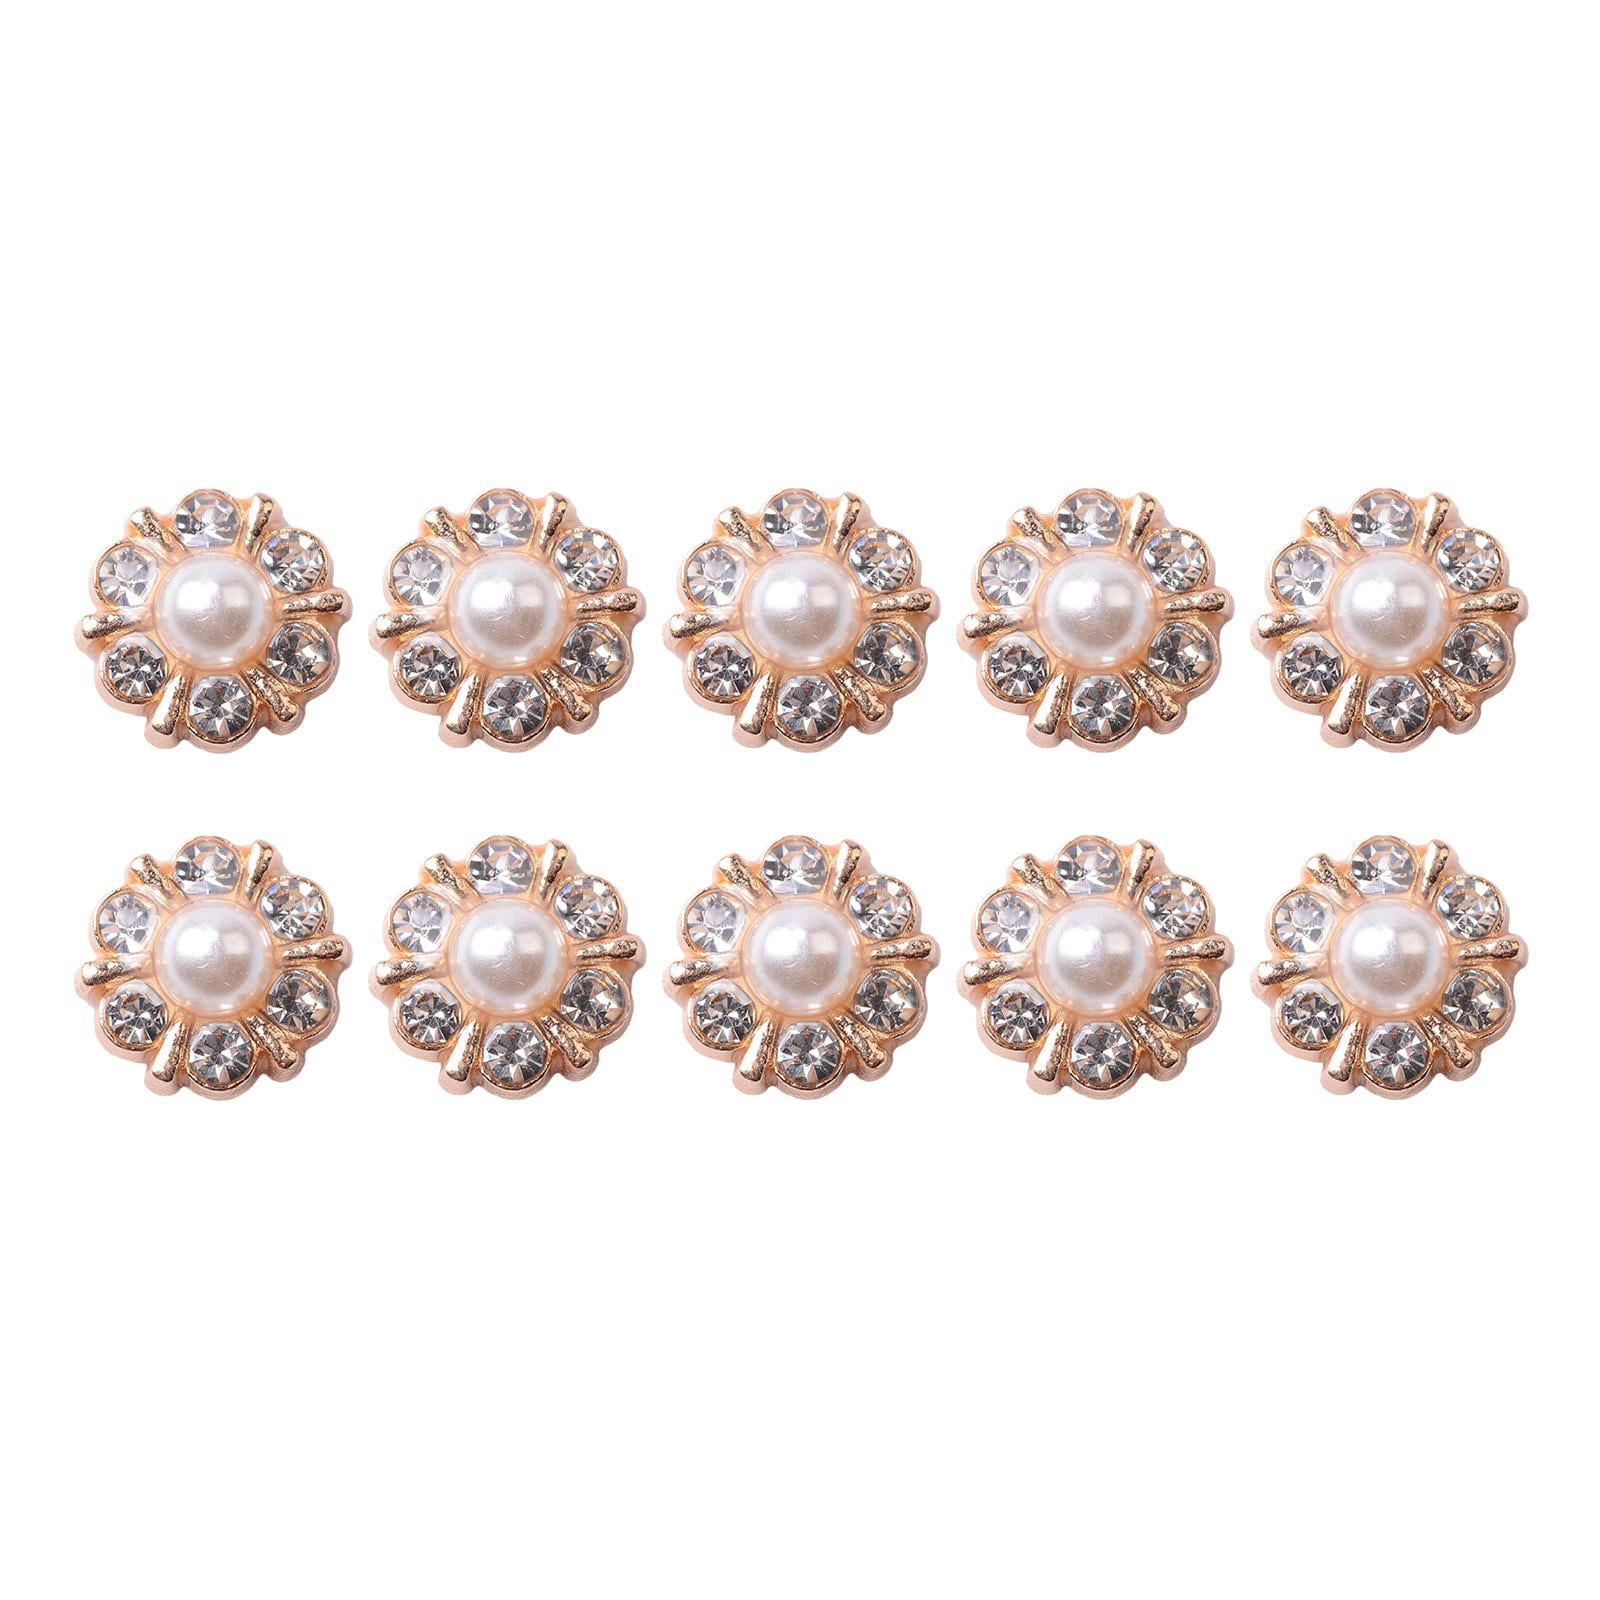  diyhub 5 PCS 16mm Flower Zircon Sliver Rhinestone Buttons,Sew on  Clothing Buttons for Decoration Wedding Party Home Decor DIY Crafts